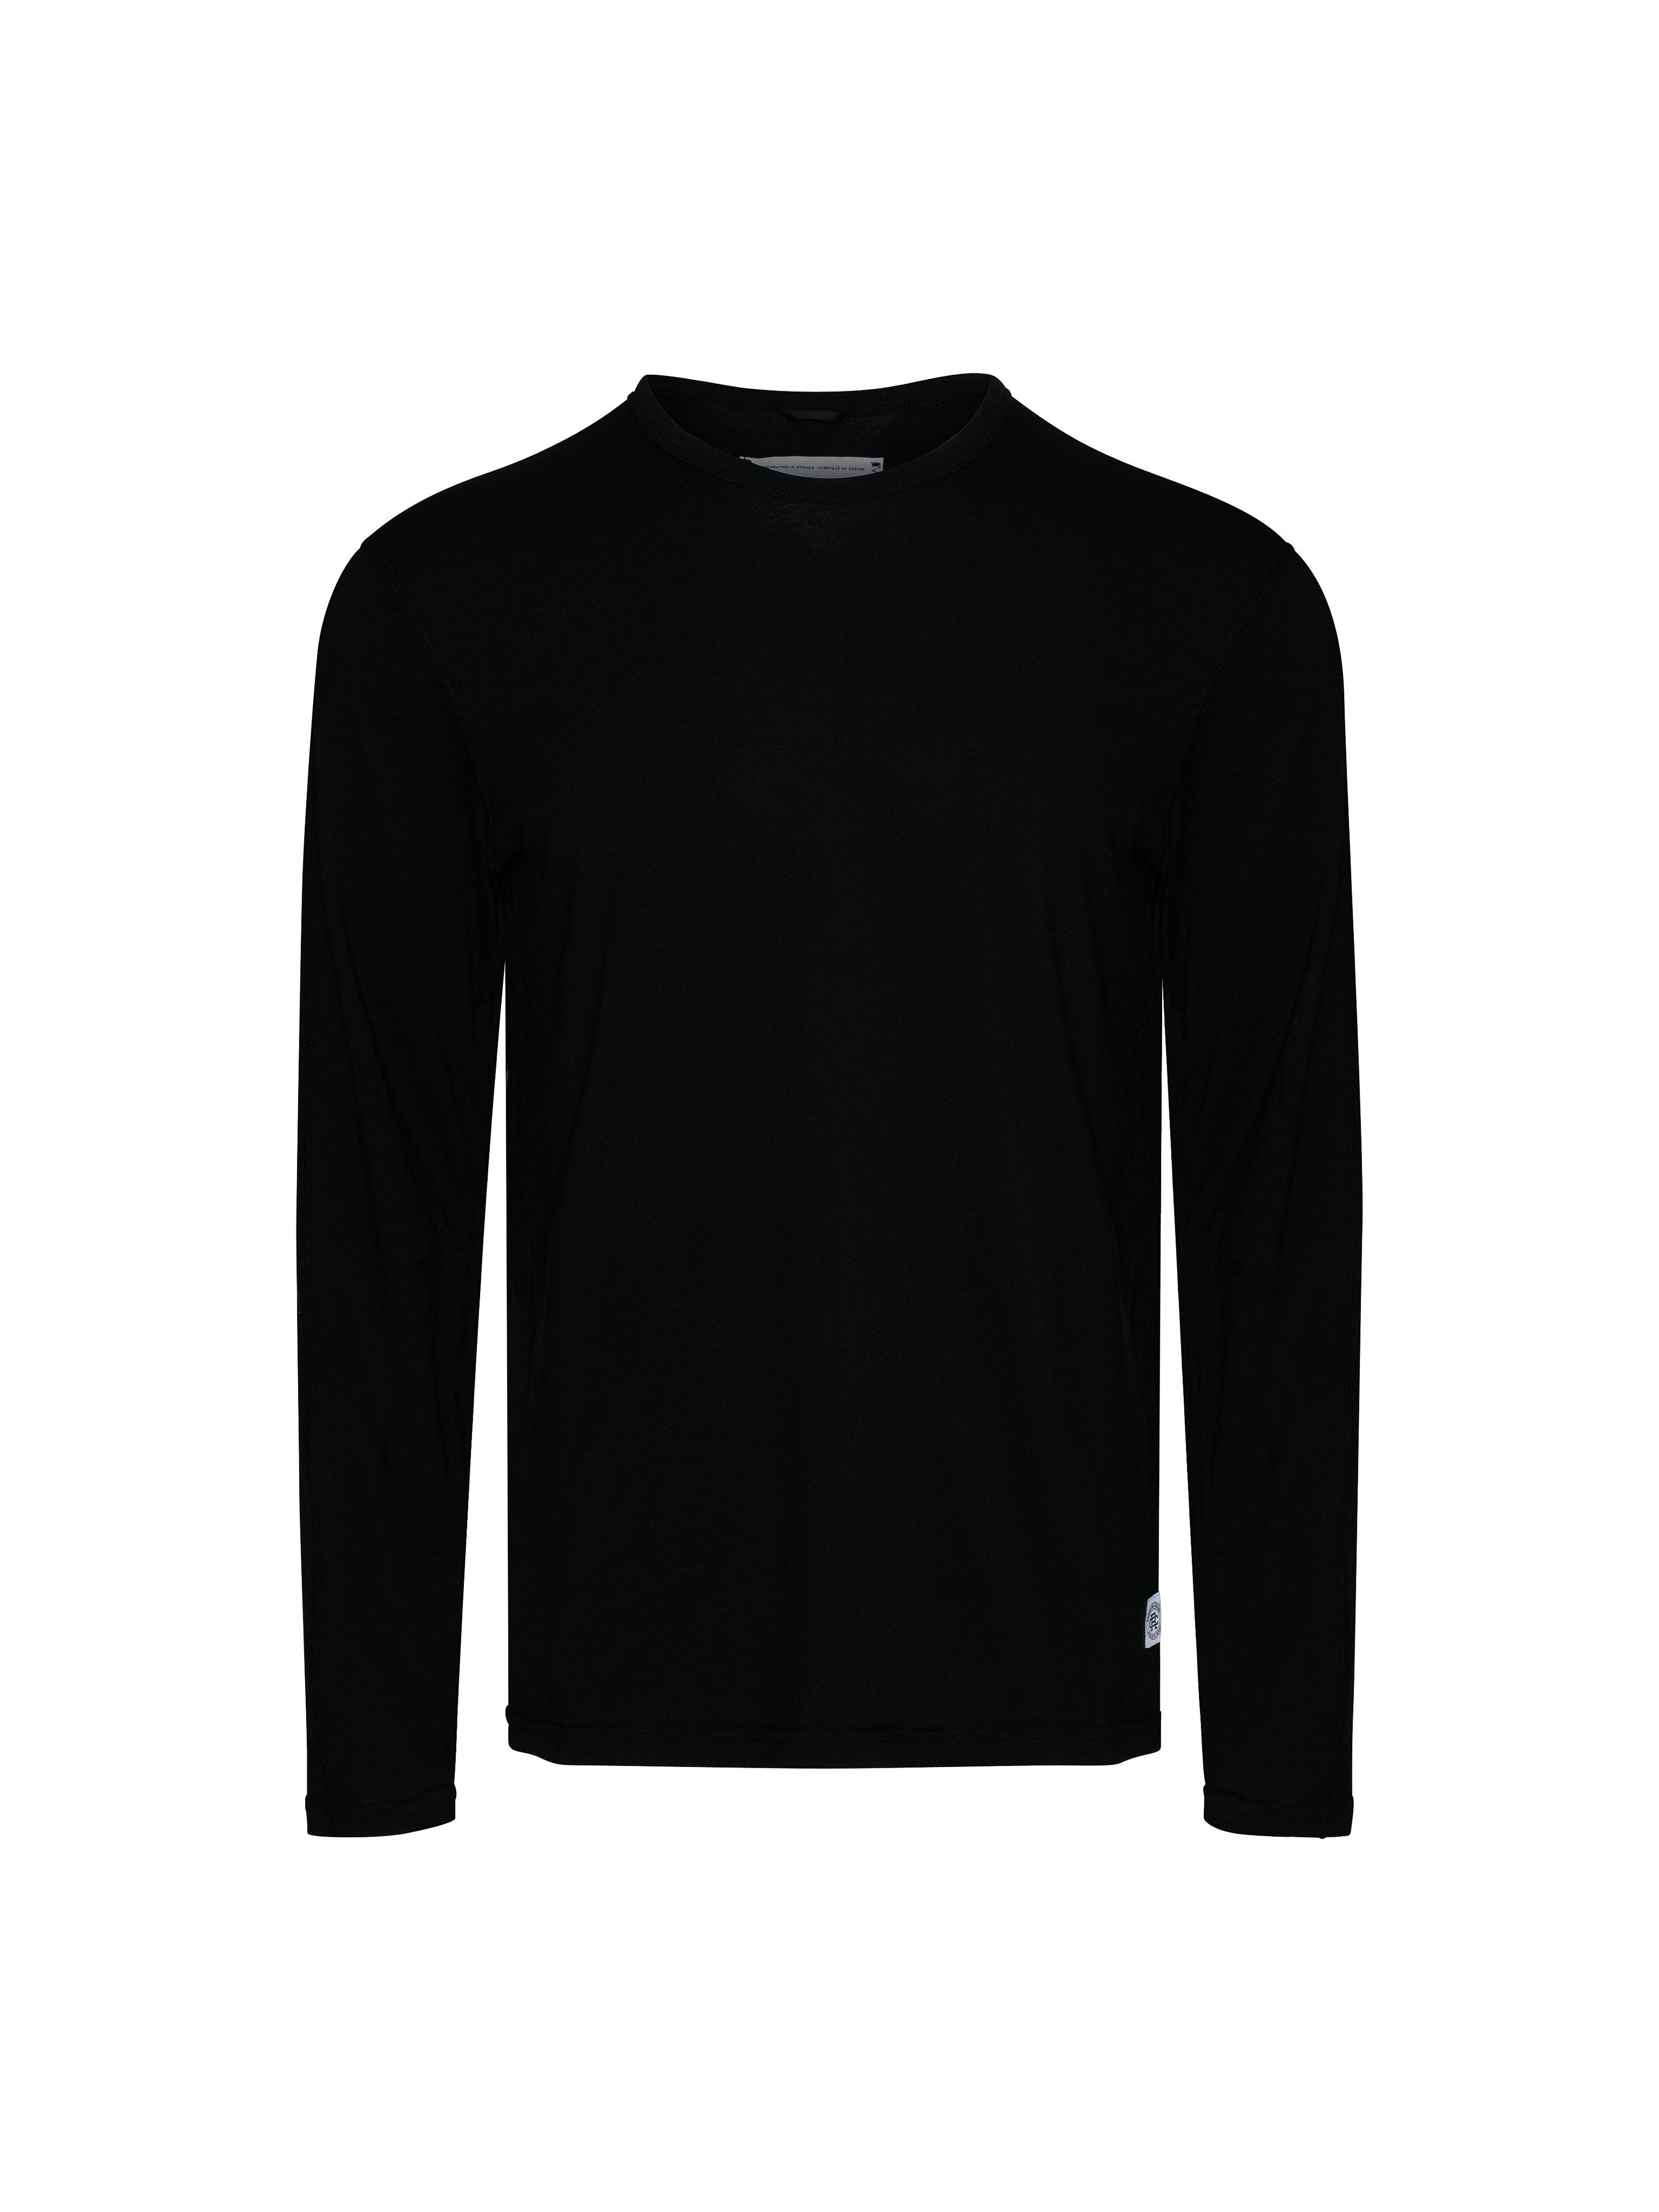 Reigning Champ Knit Ringspun Jersey Ls T-shirt in Black for Men - Lyst